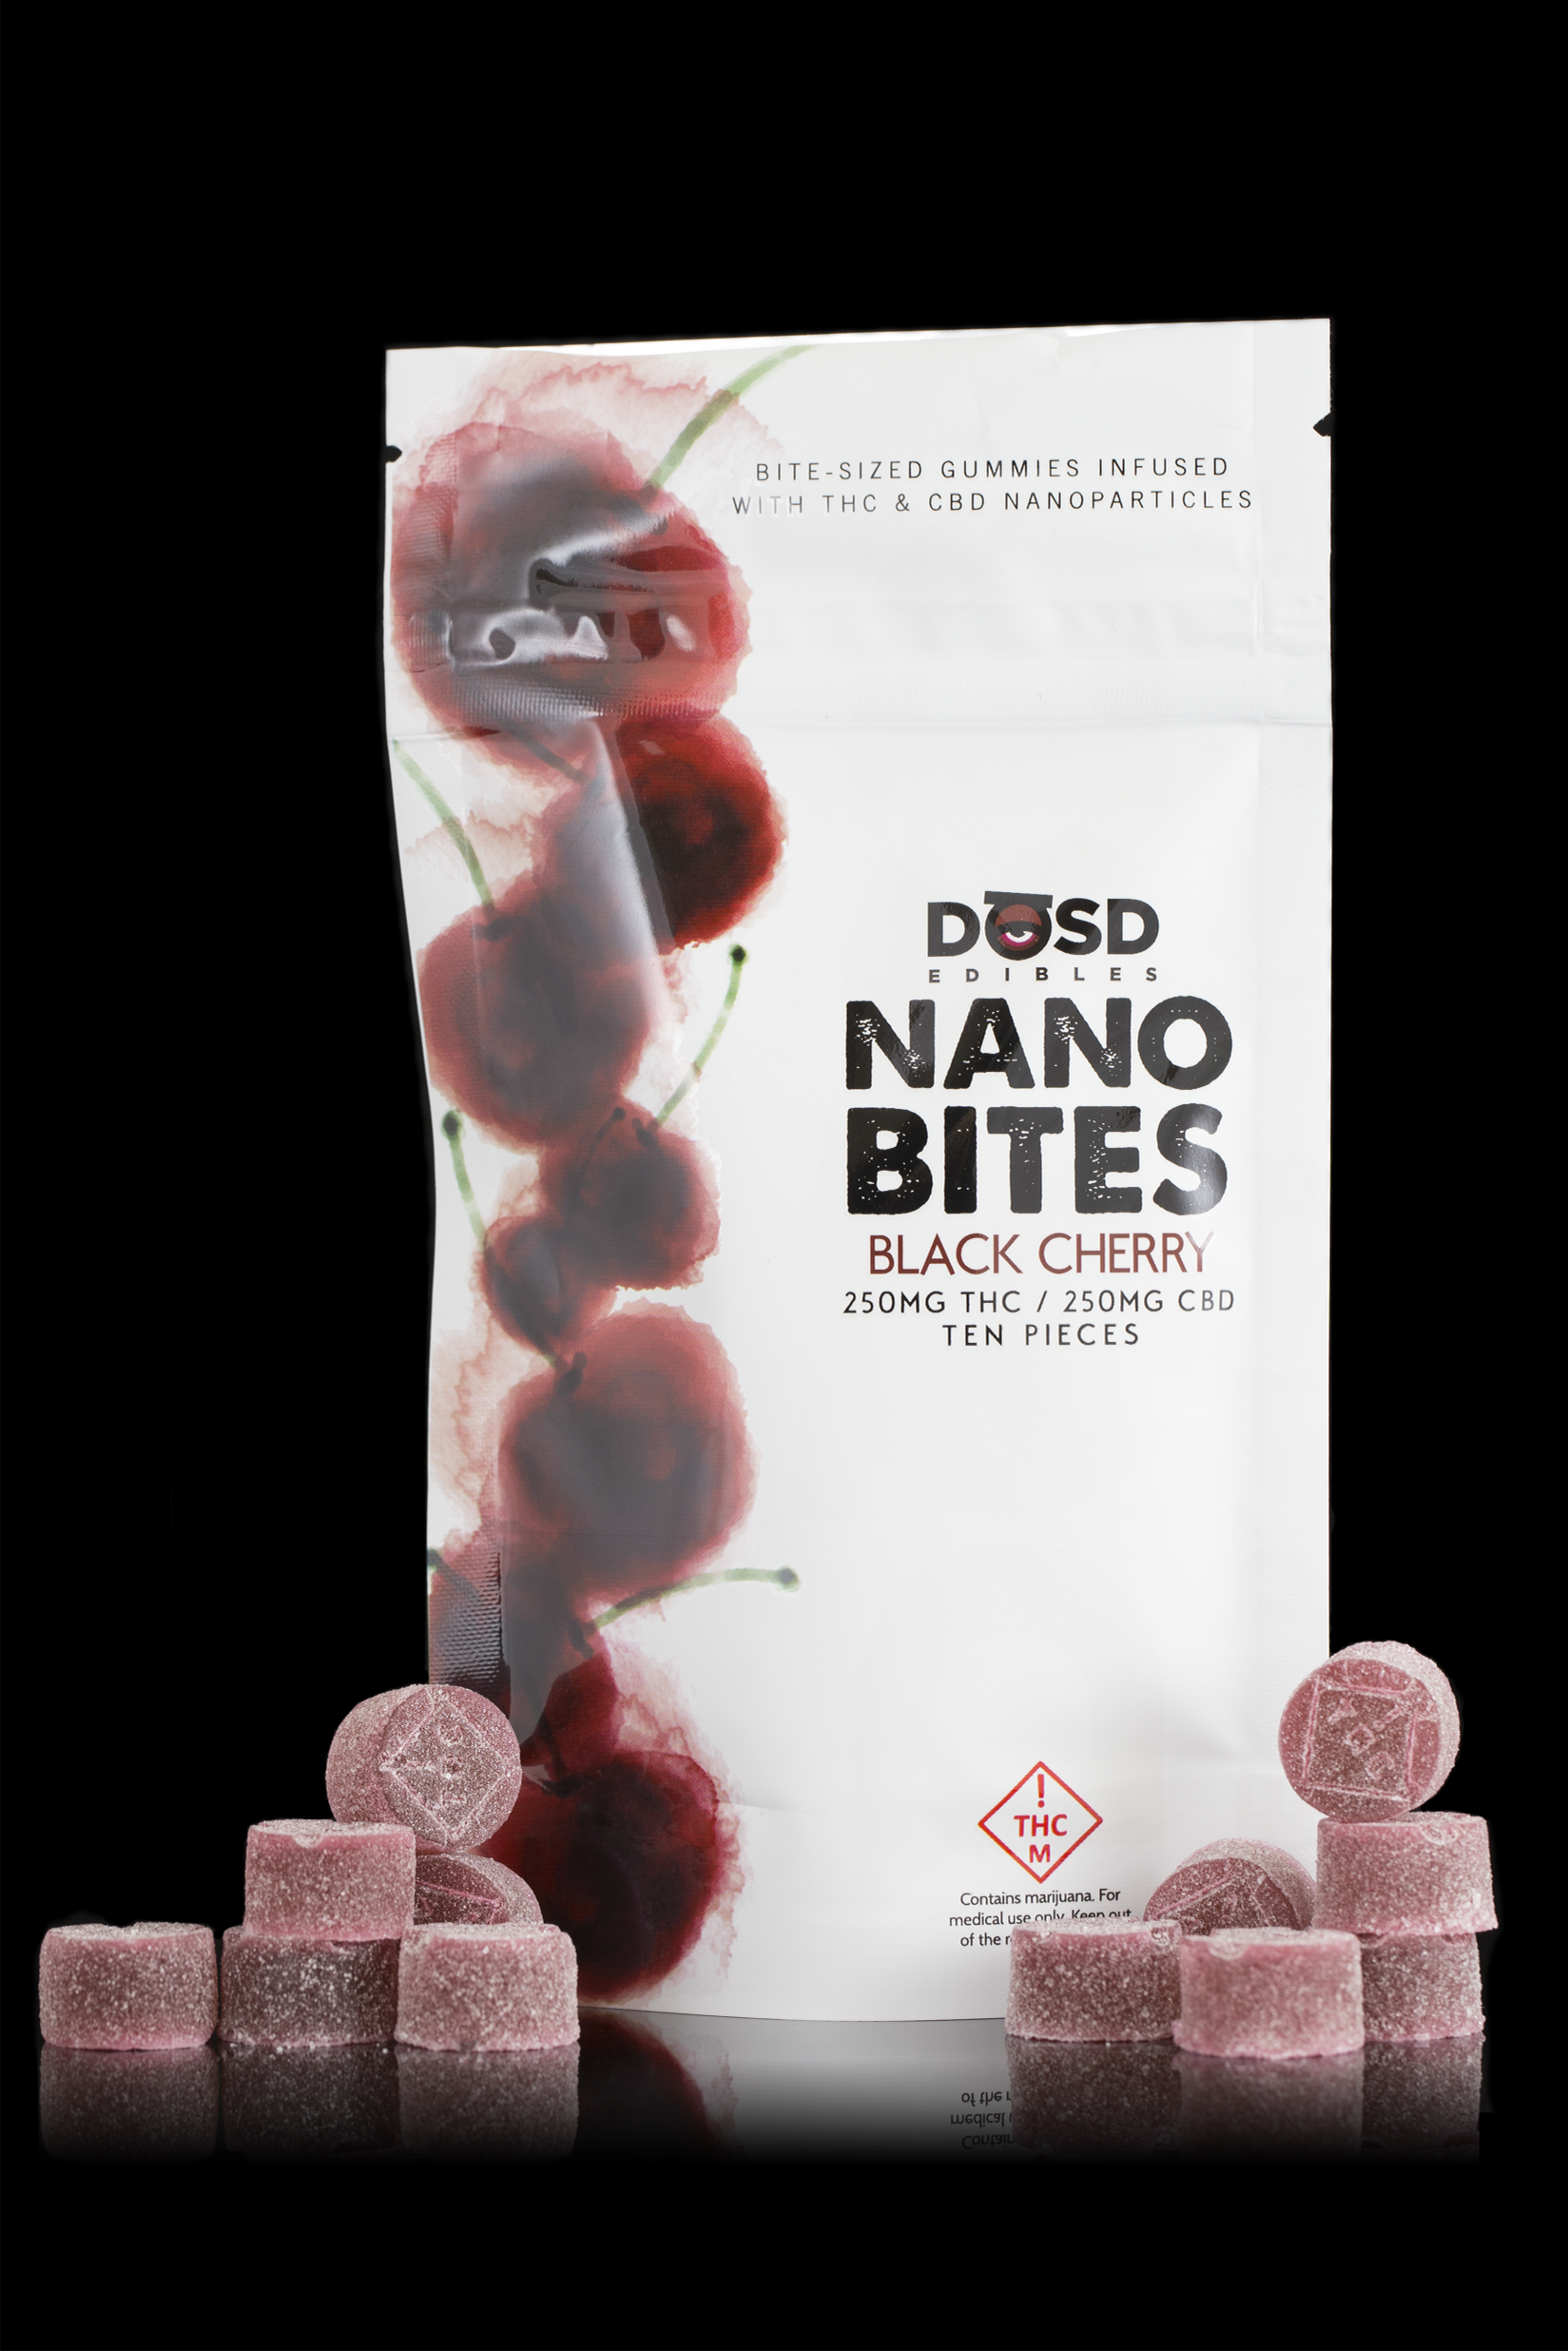 DŌSD Edibles™ | Infused with Cannabinoid Nanoparticles